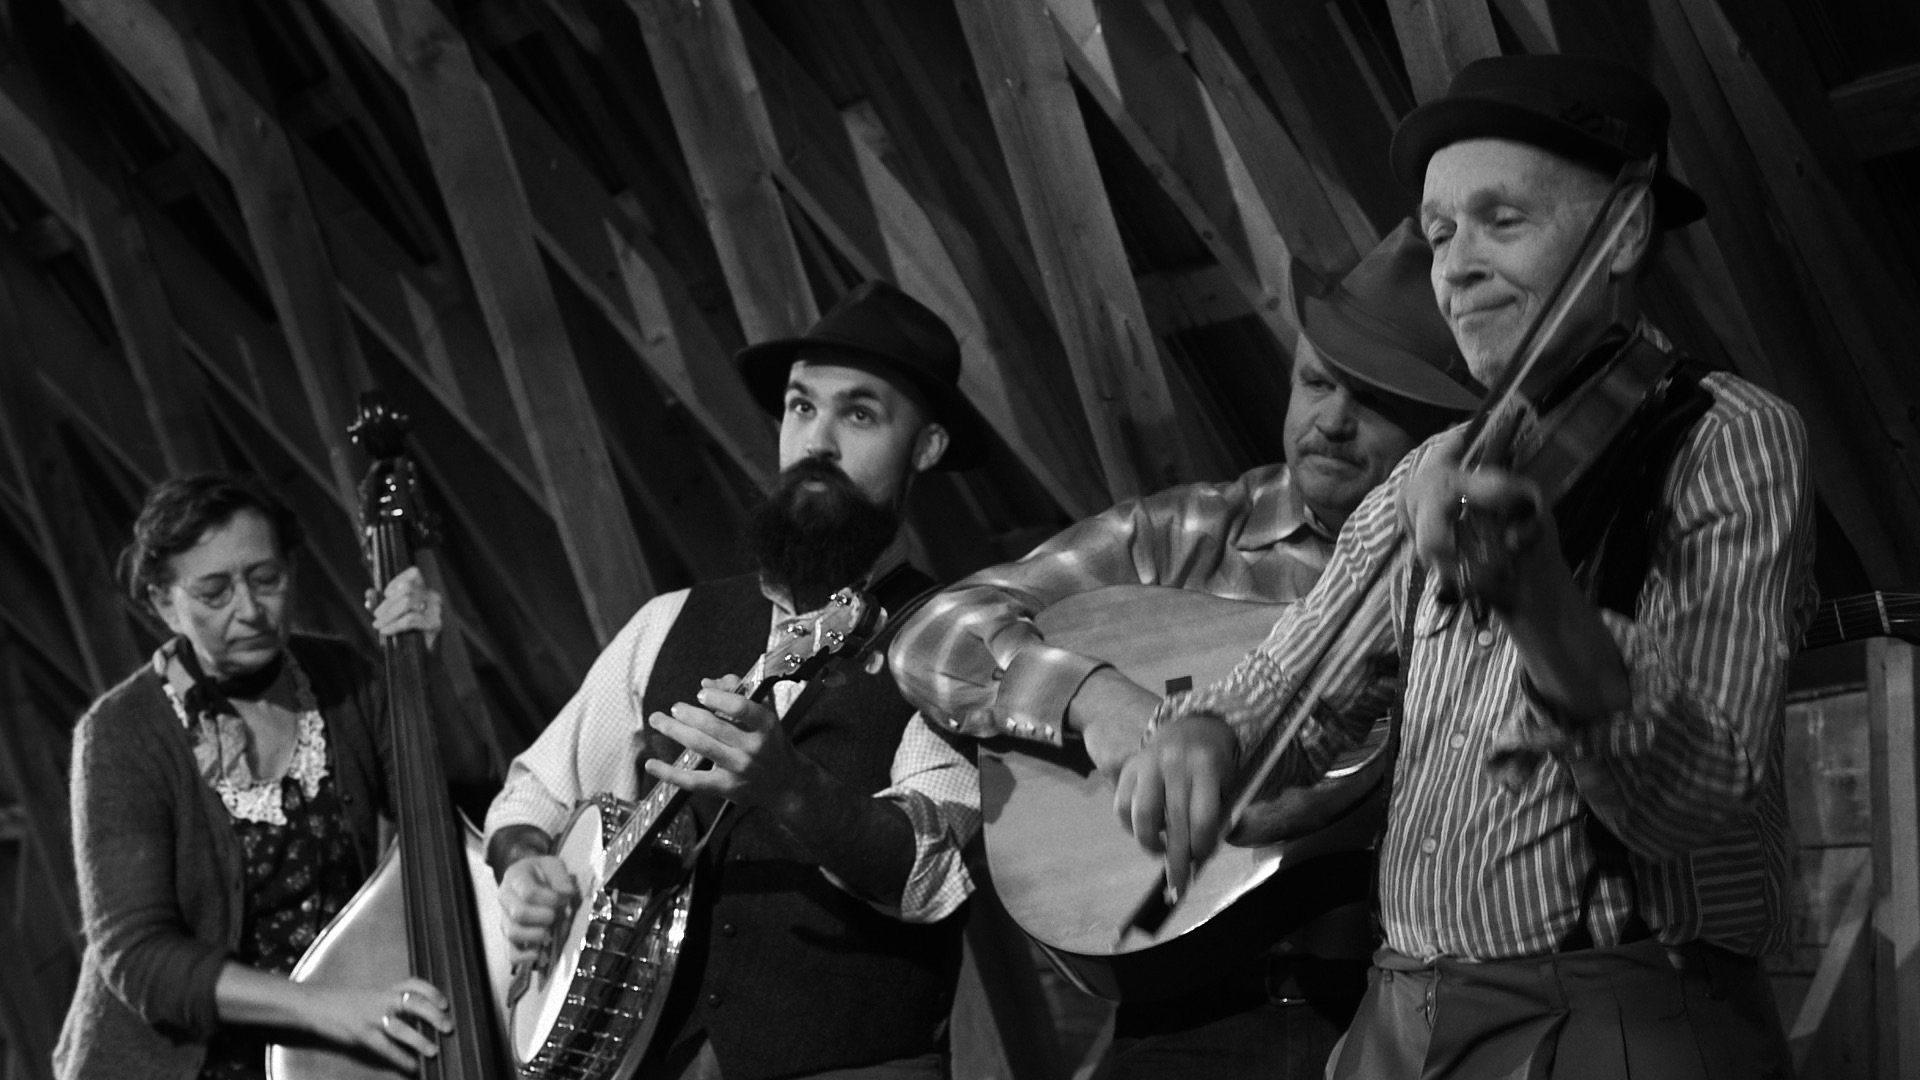   Carrie Cook, Tristan Henderson,   Mark Struhsacker   and Pete Sutherland perform music for the barn dance in 'The Farm Boy.' Photo courtesy Hanging Mudflap Productions  